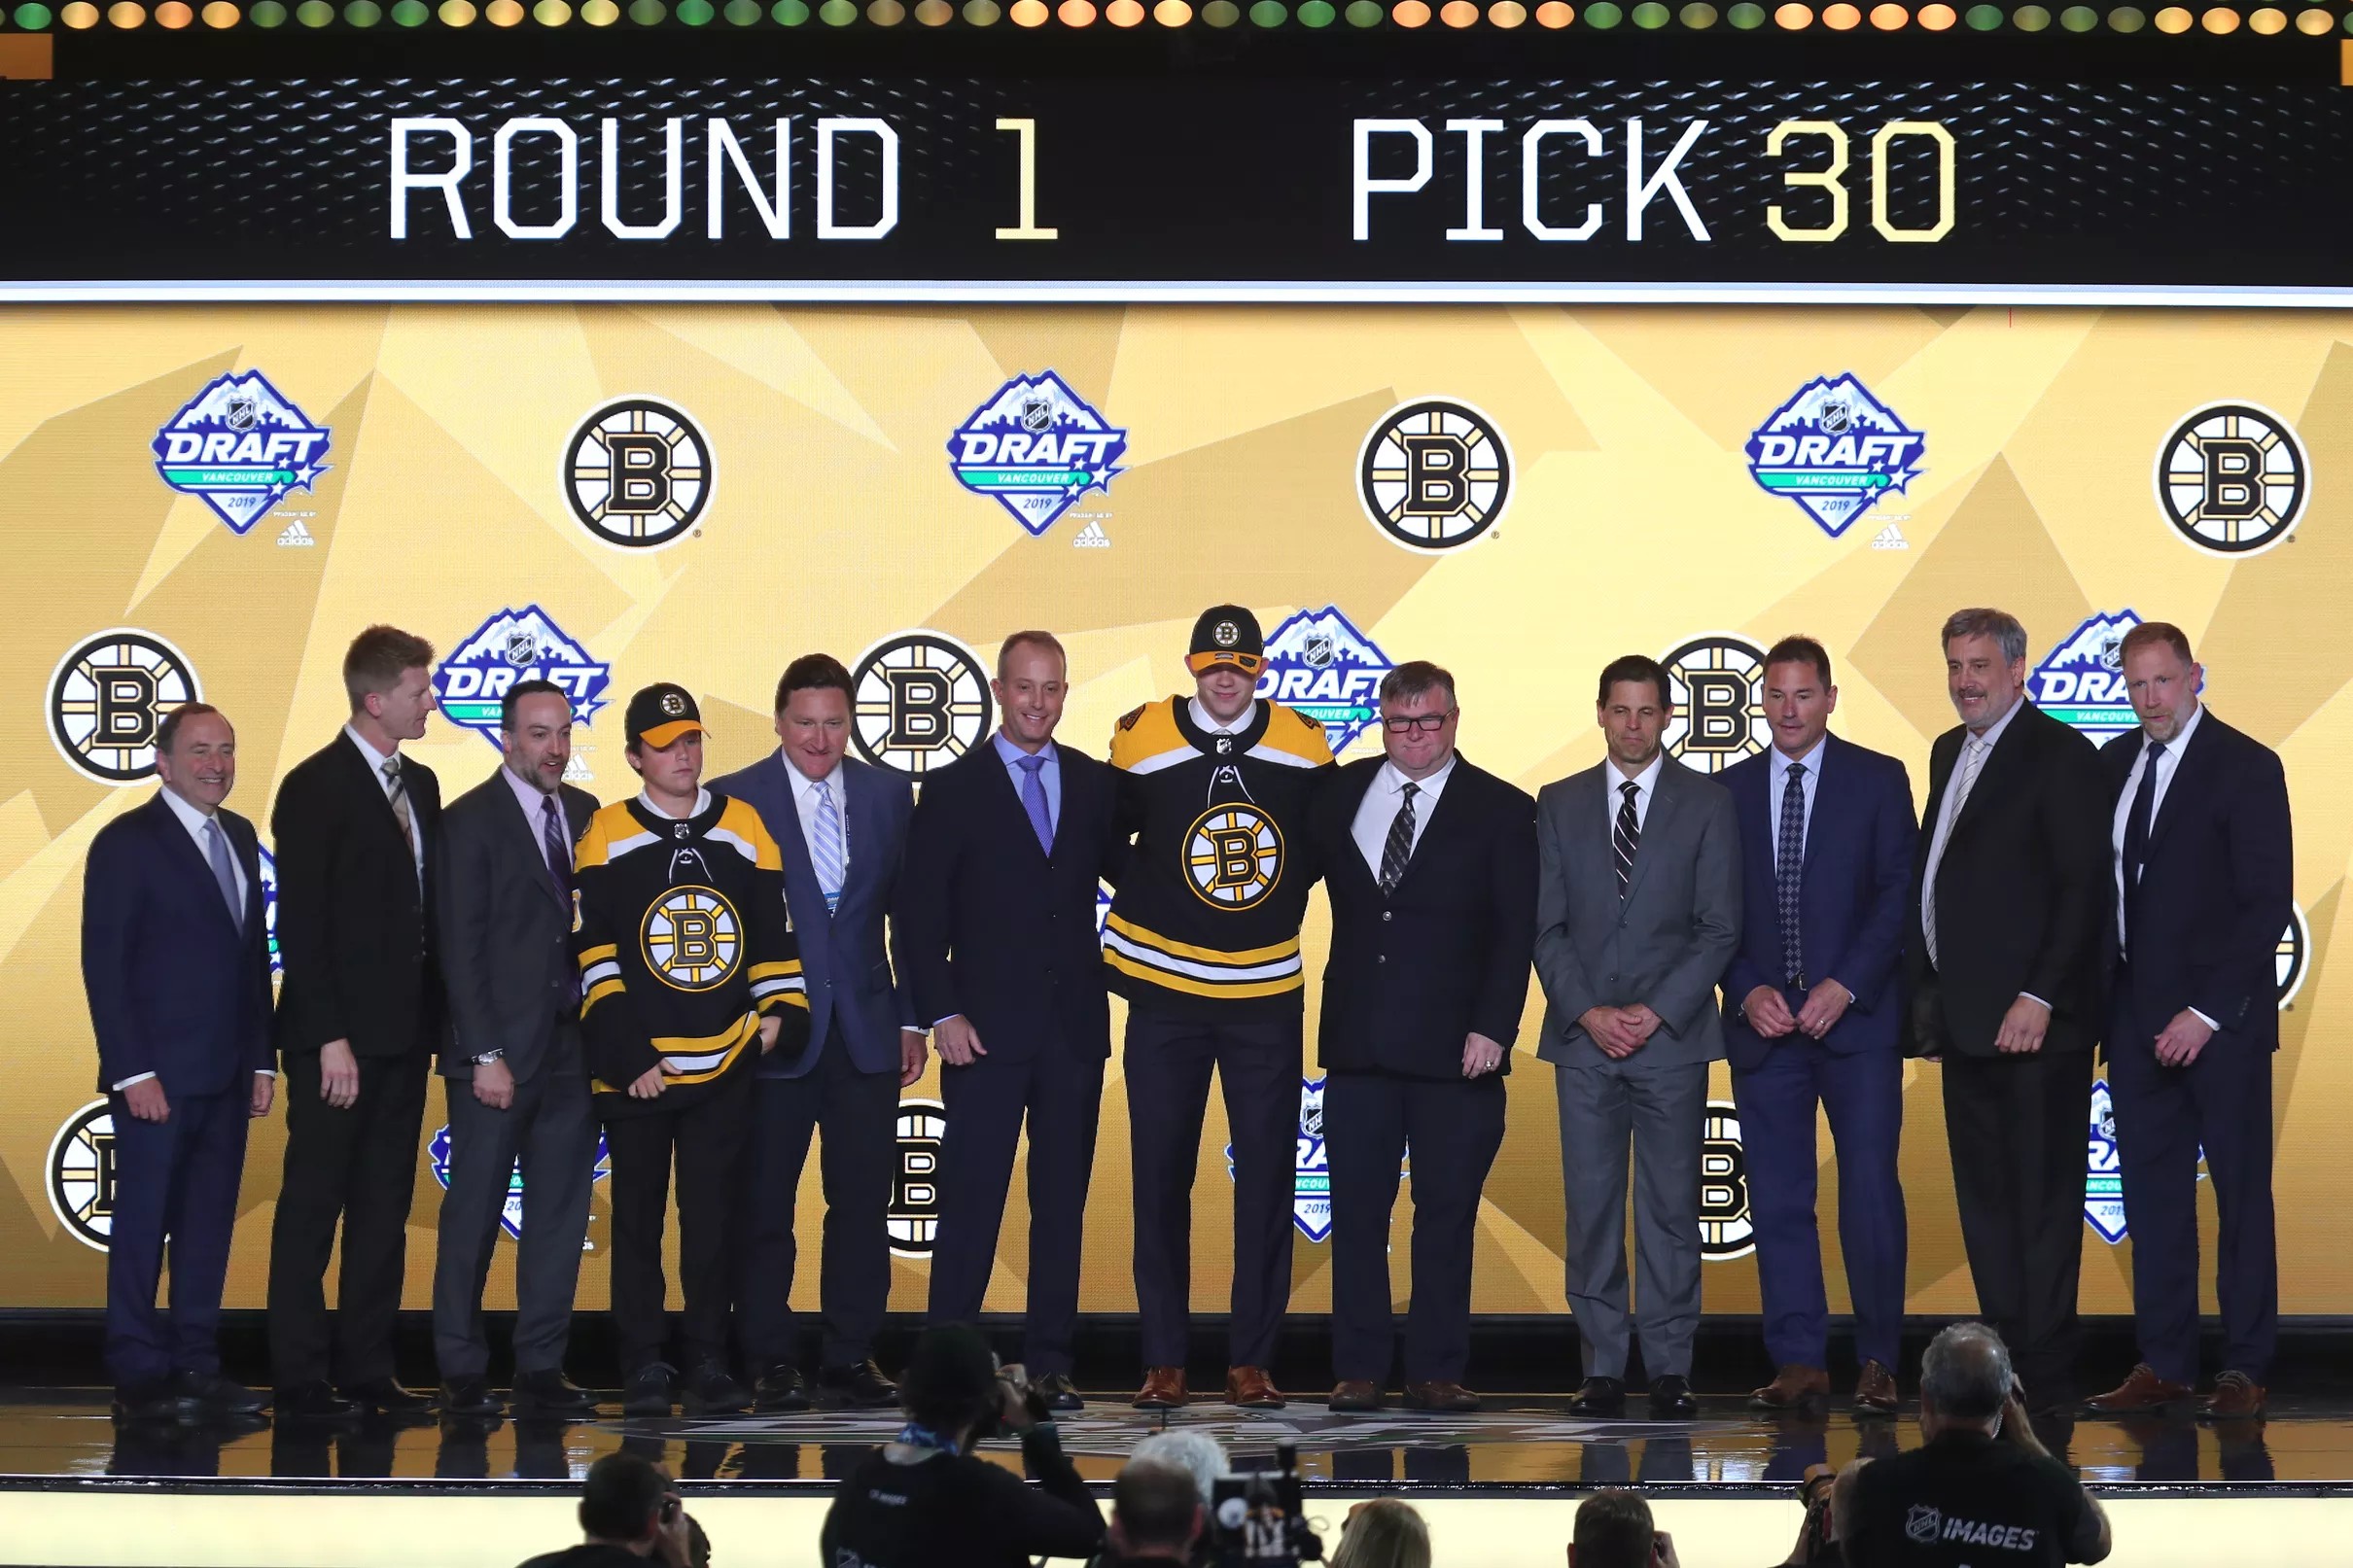 The NHL Draft is next week. Who should the Bruins be looking at?